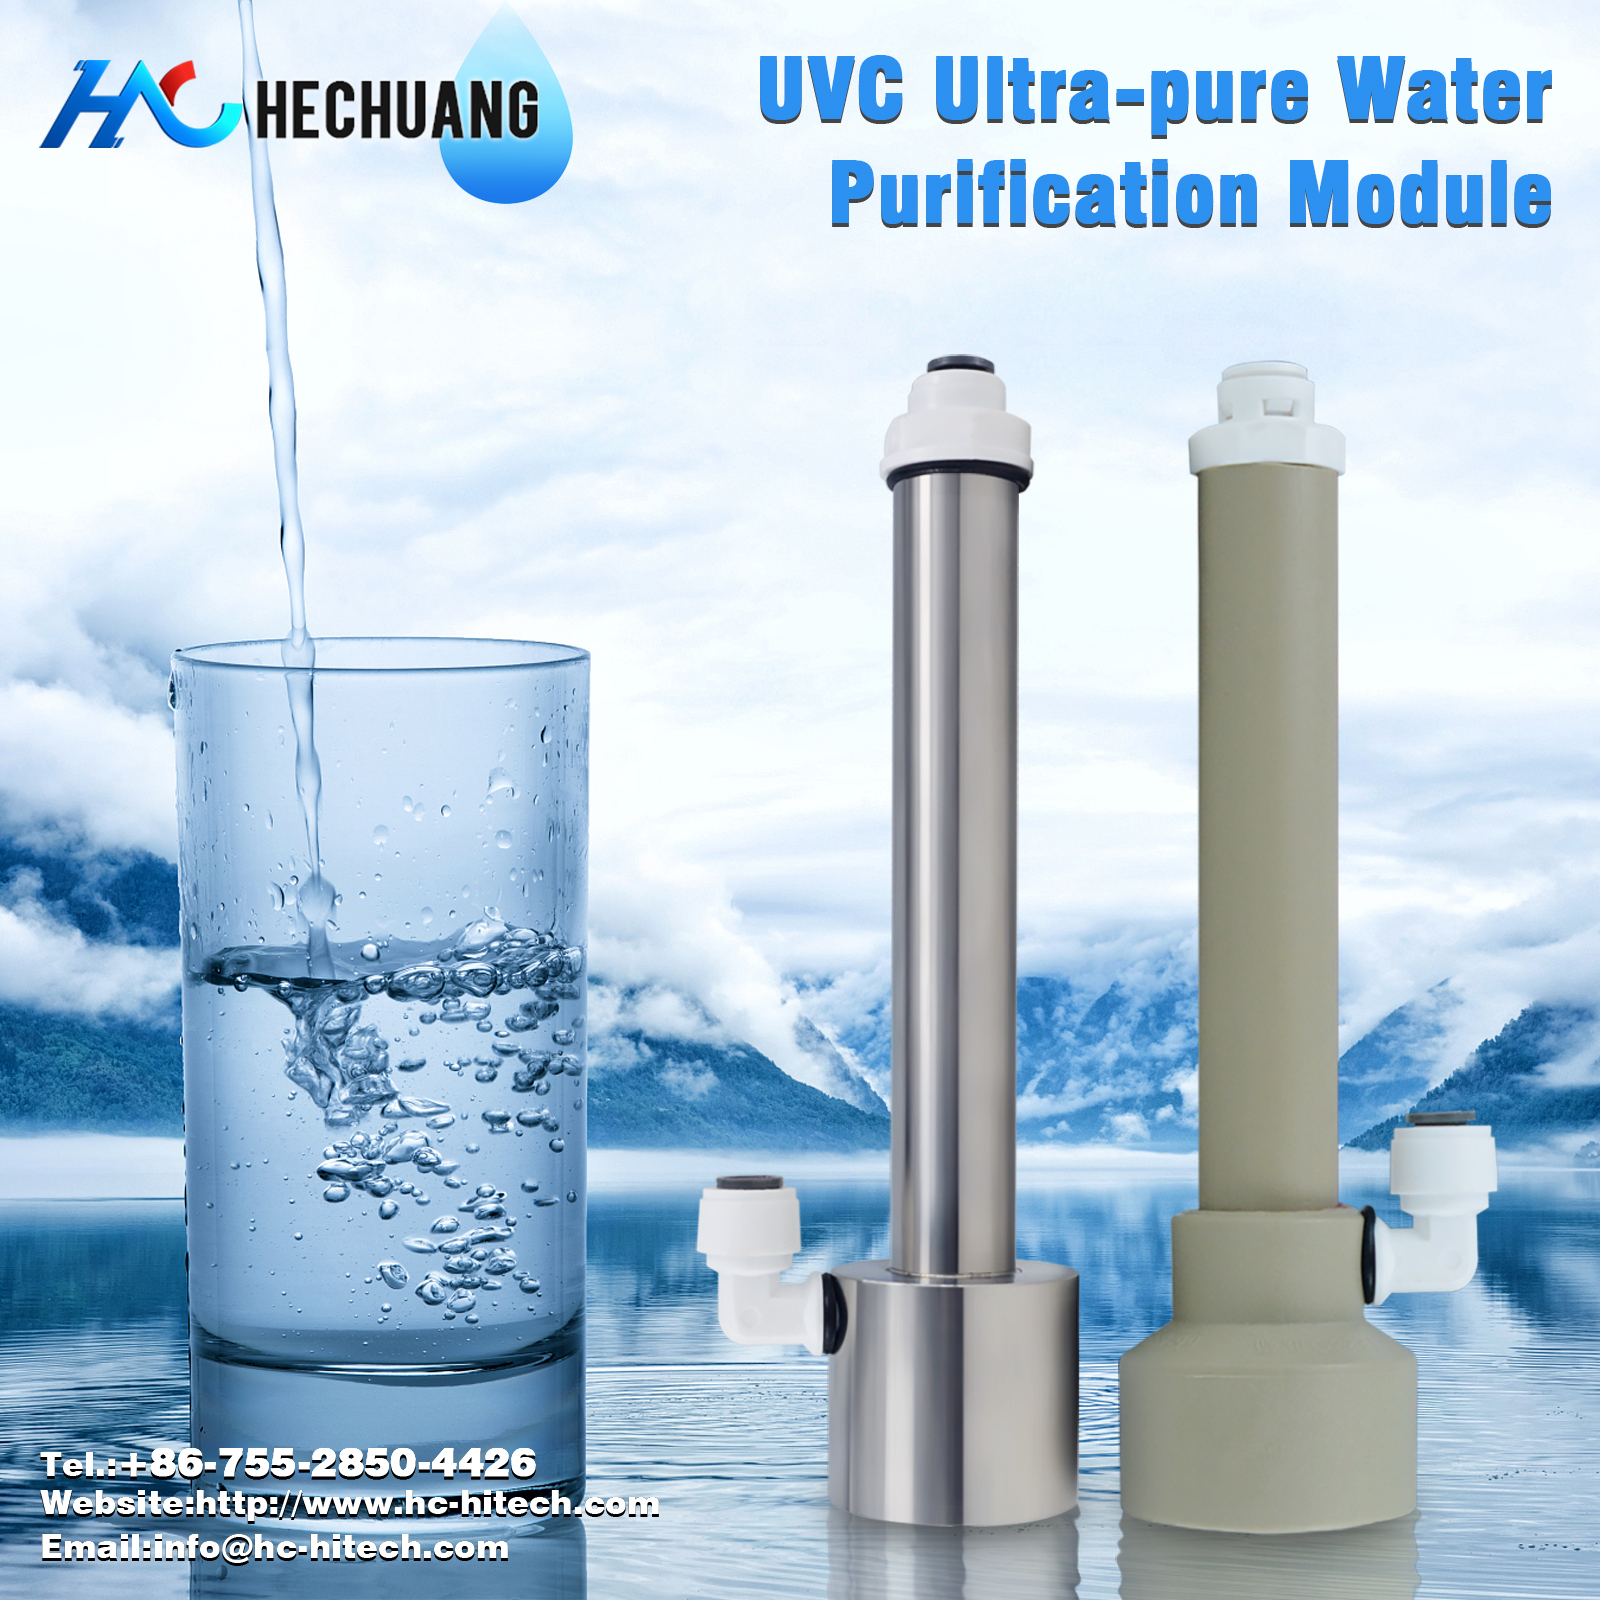 Ways to Keep Our Water Clean: You Should Do it Now!Maintenance-free UVC Water Disinfection Module for all Water Treatment Systems!www.hc-hitech....